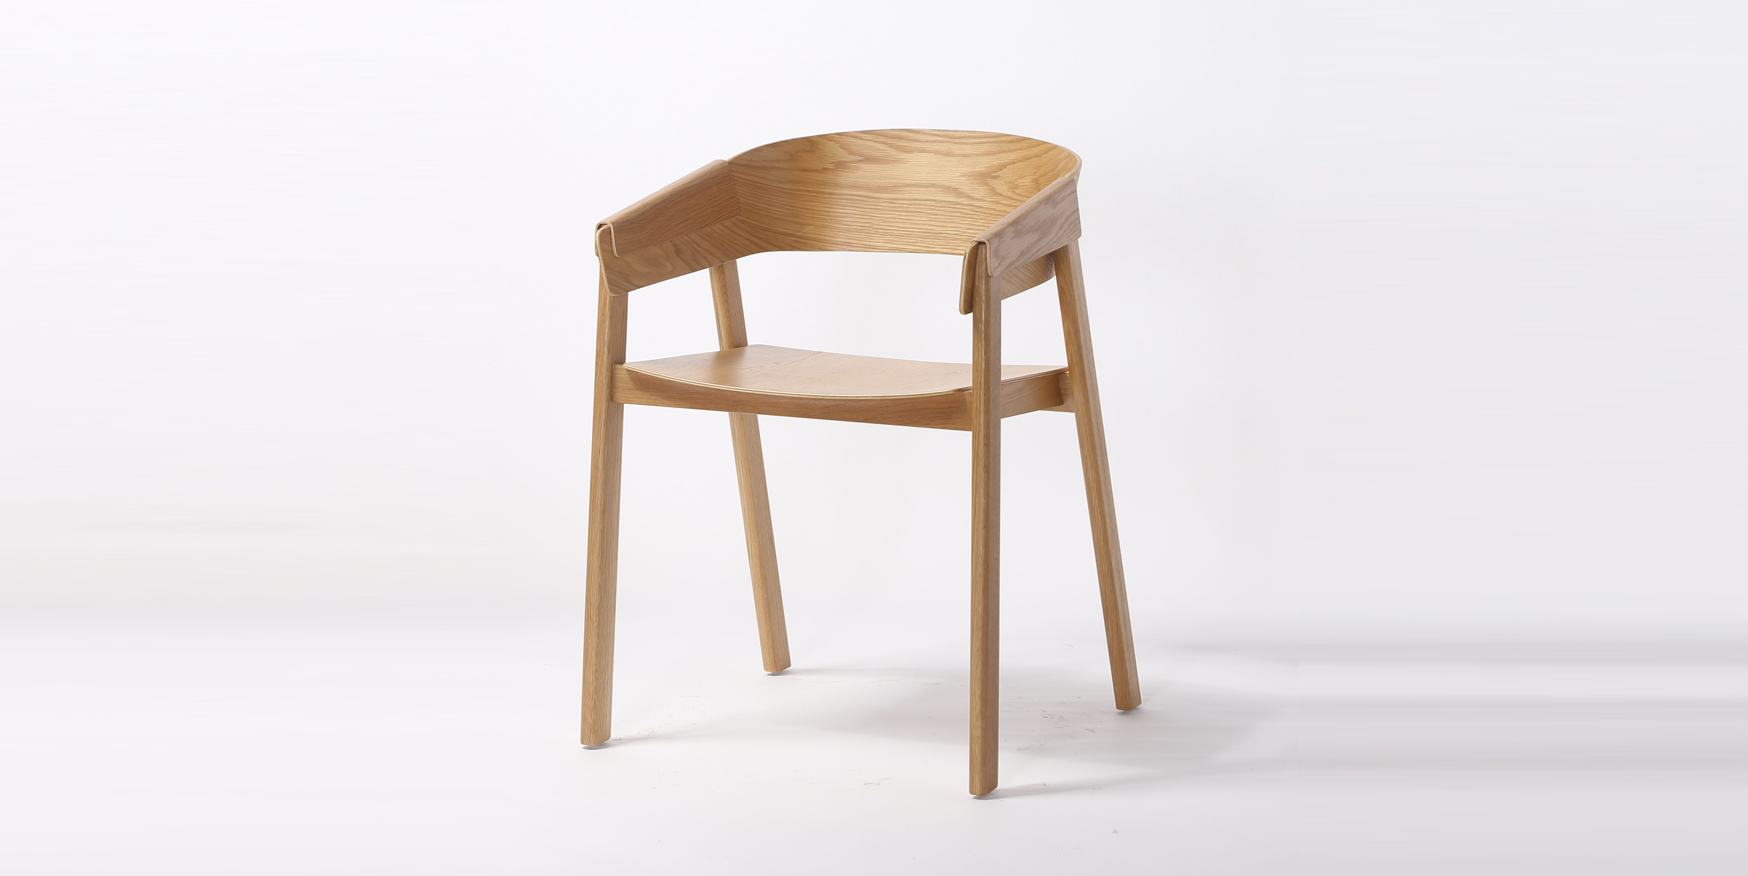 wooden dining chairs with arms
